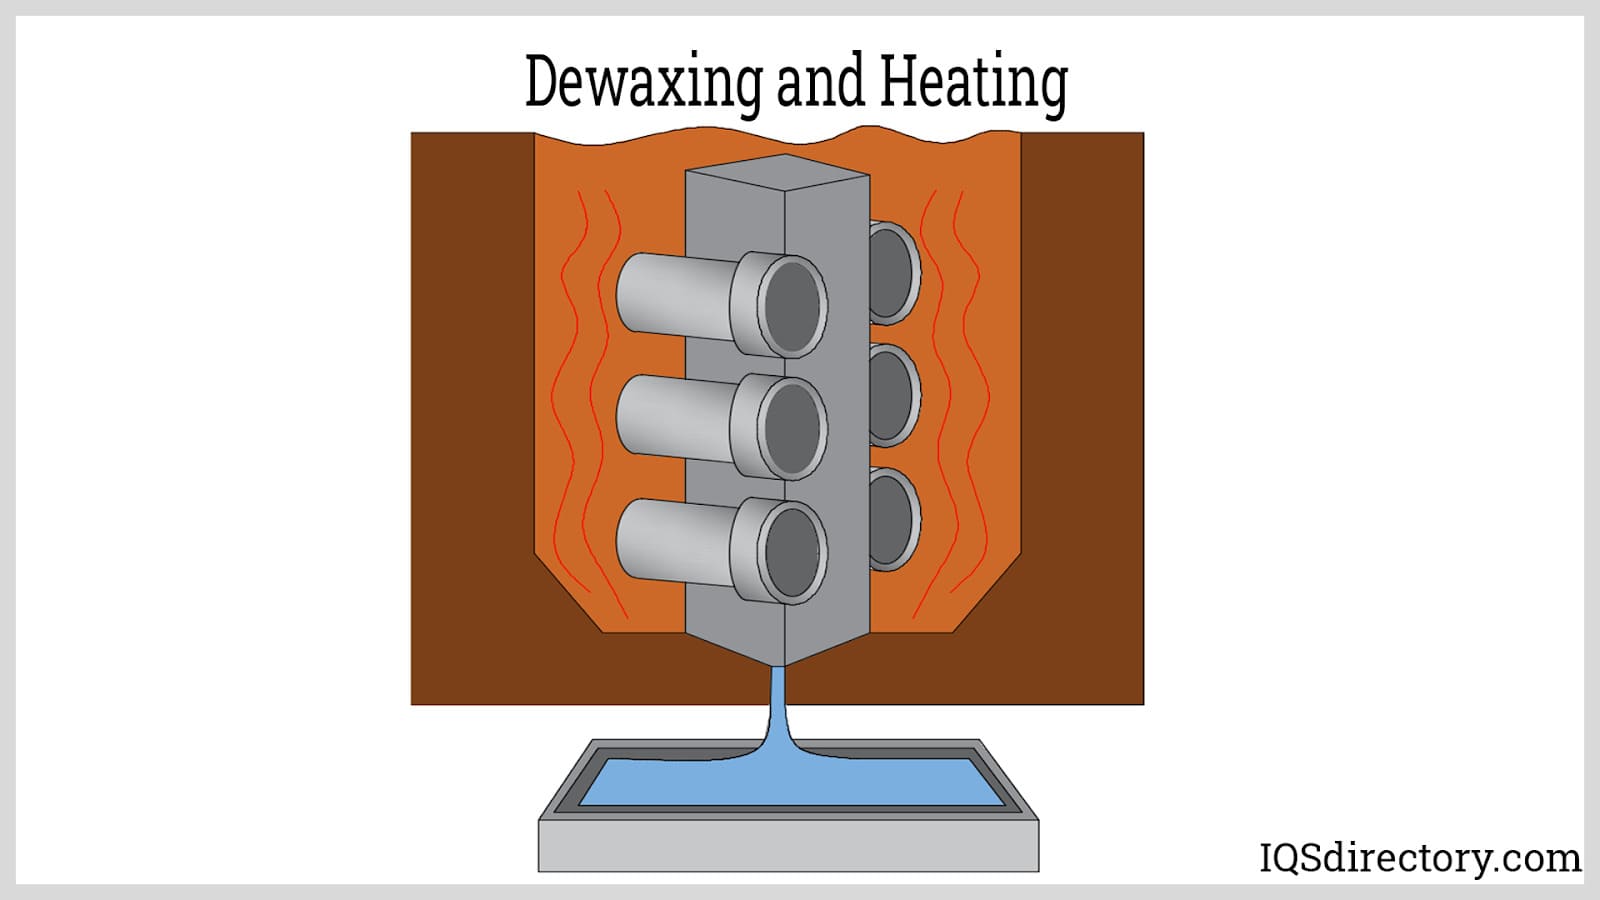 Dewaxing and Heating